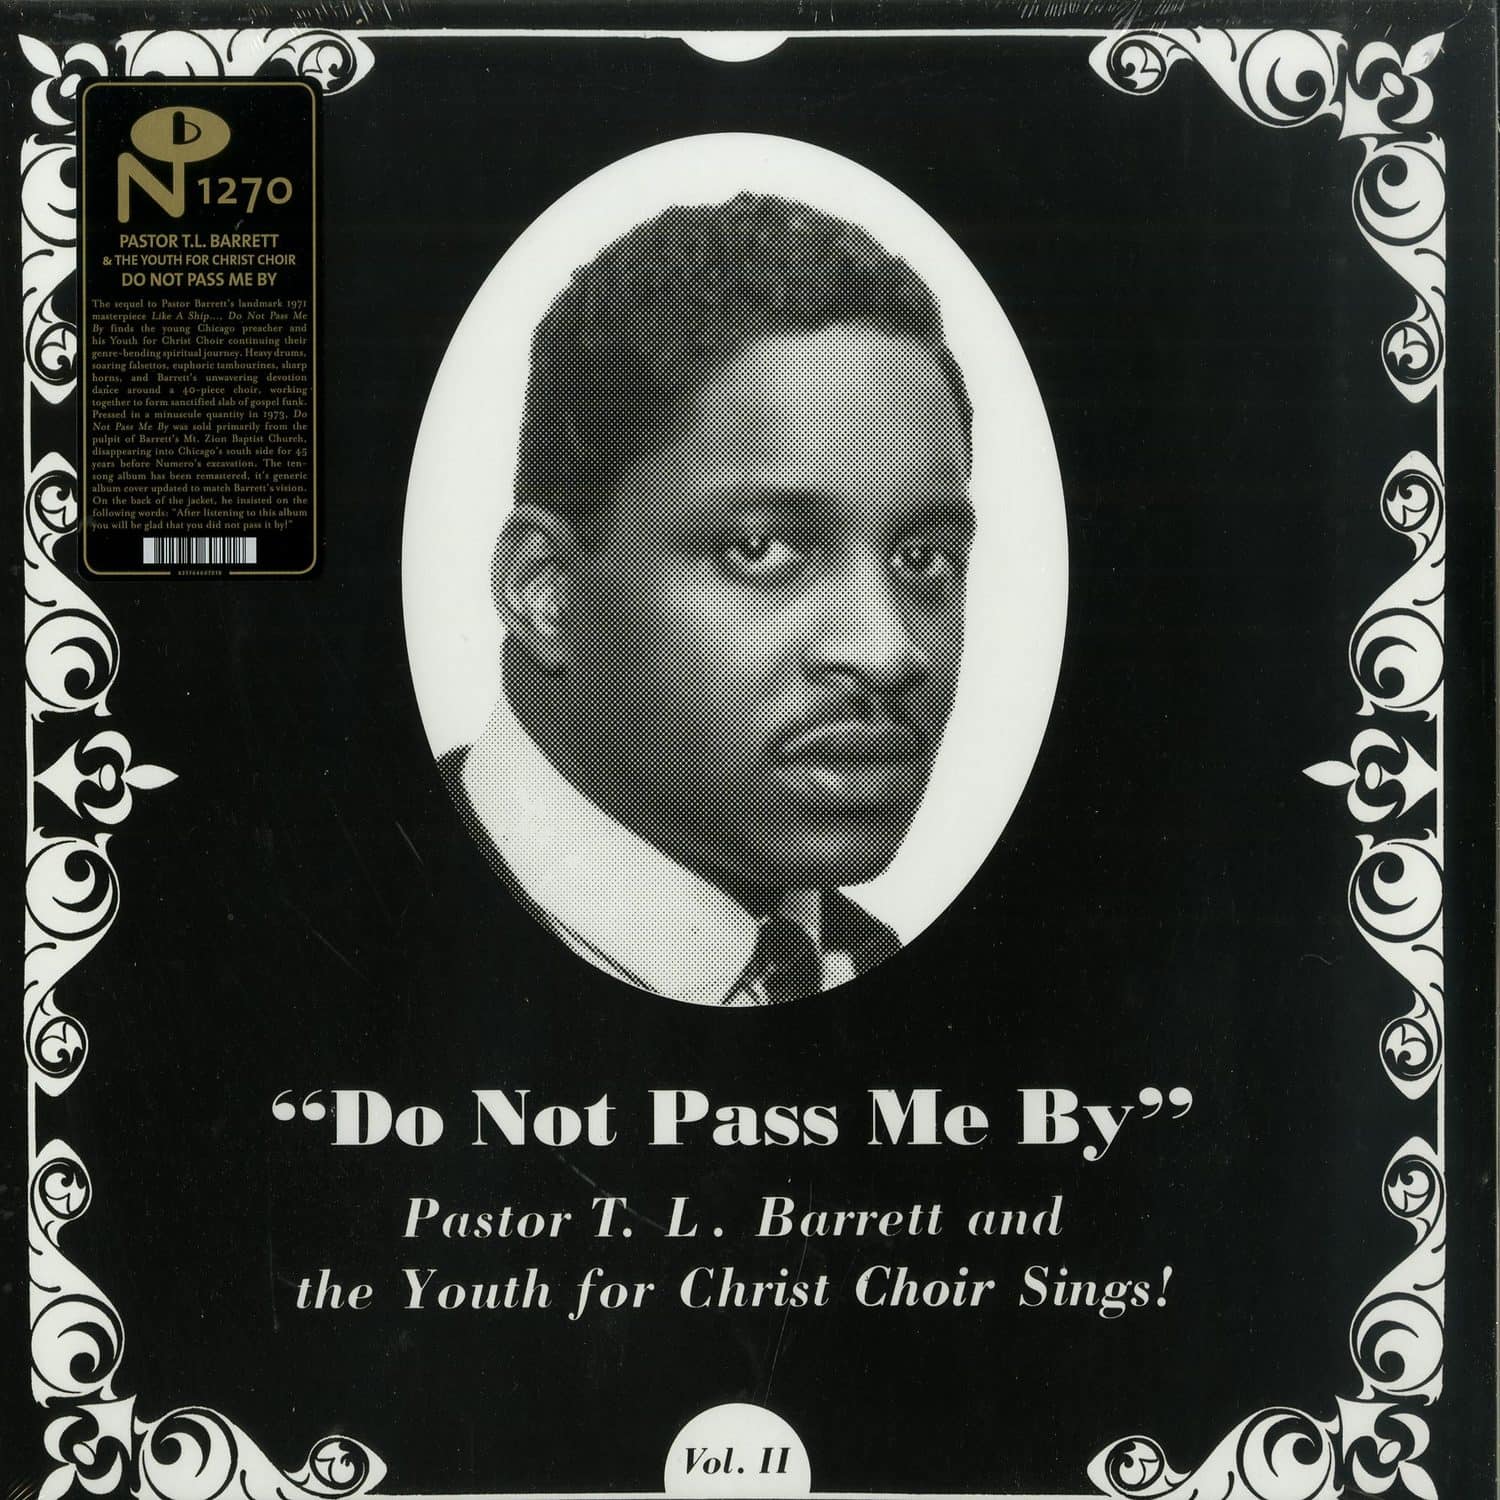 Pastor T.L. Barrett and The Youth for Christ Choir - DO NOT PASS ME BY VOL. II 